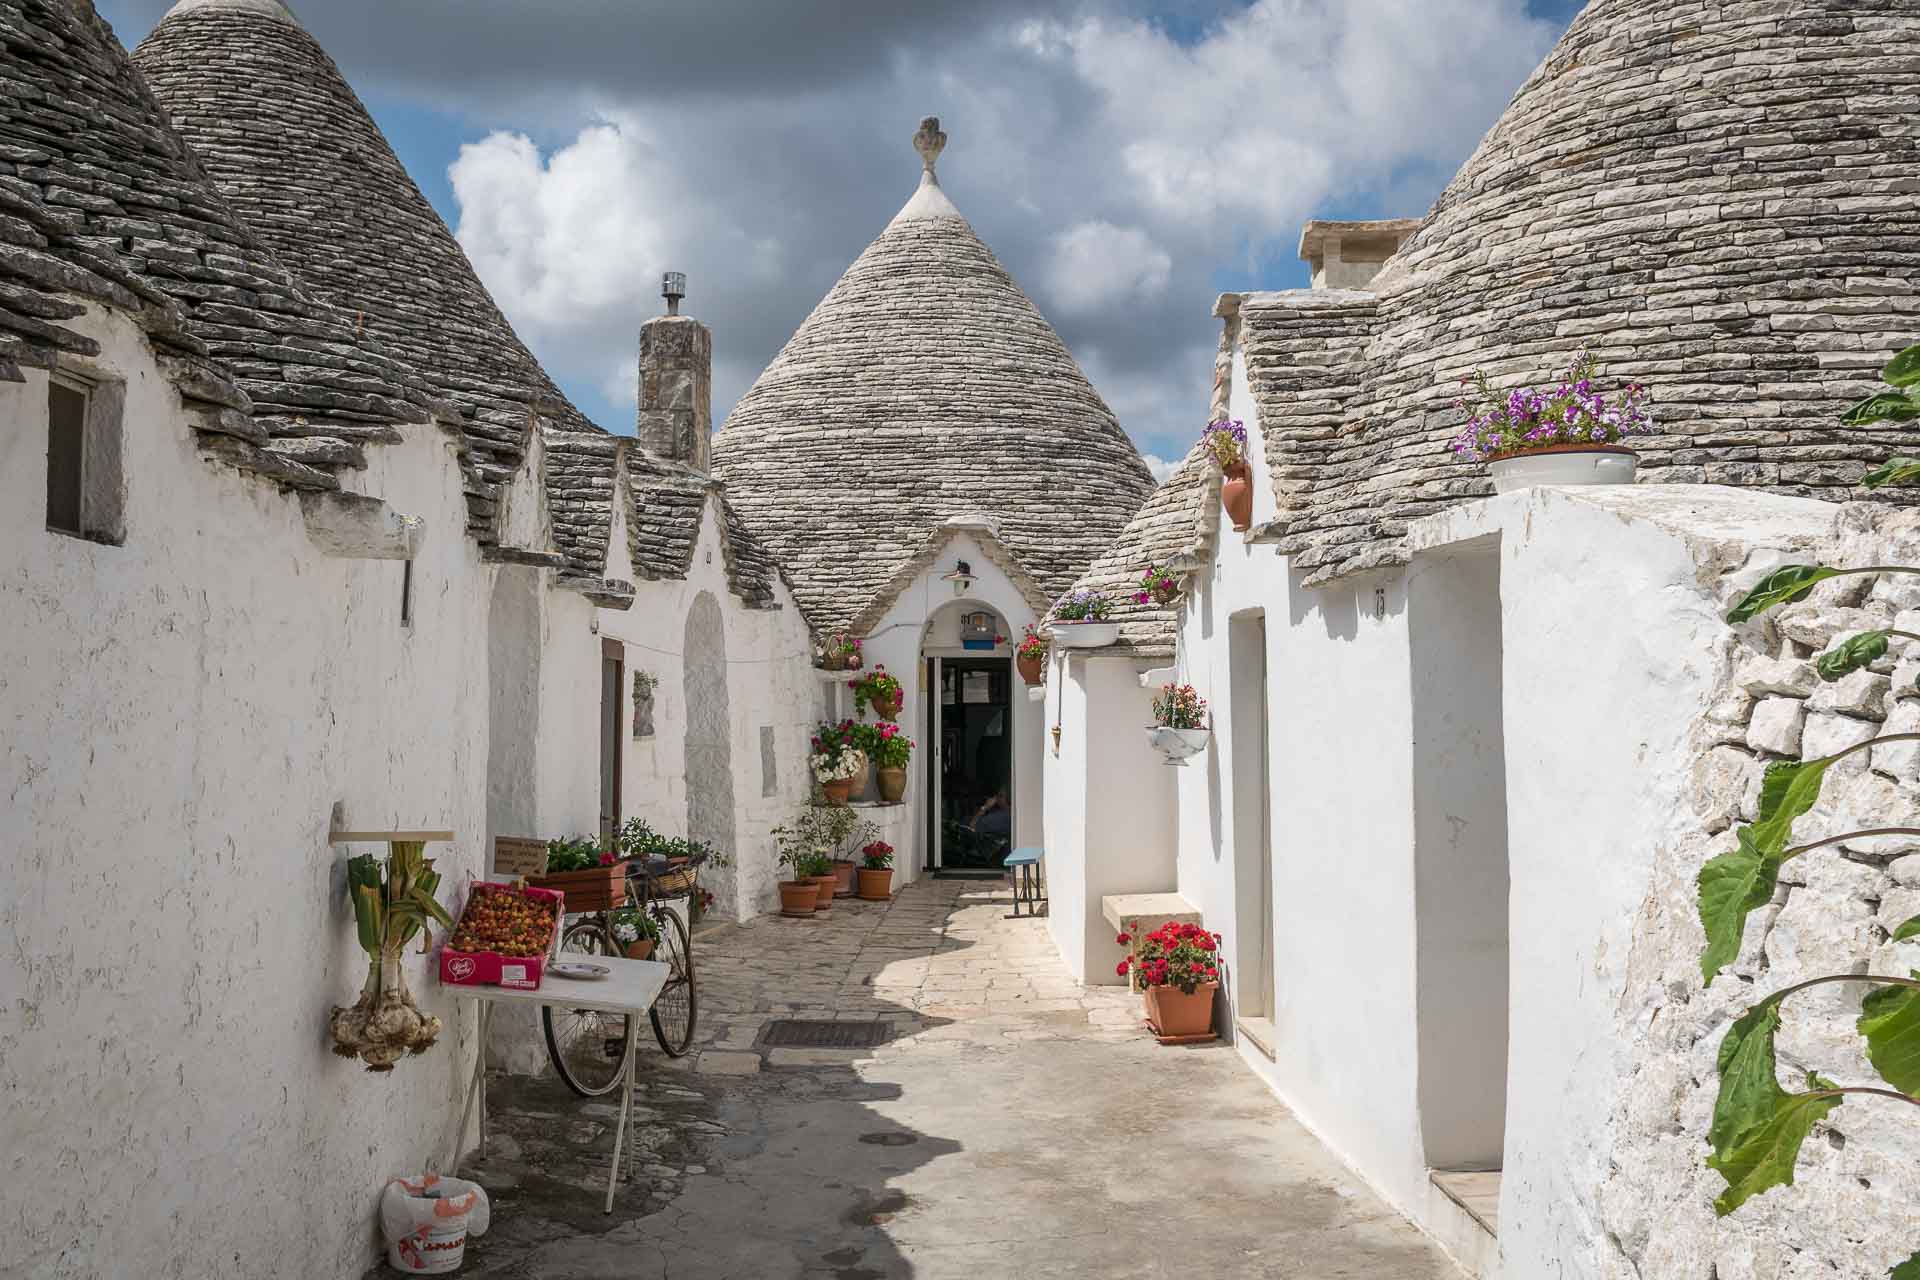 A dead end street with trulli houses in alberobelo Puglia, a Puglia itinerary must